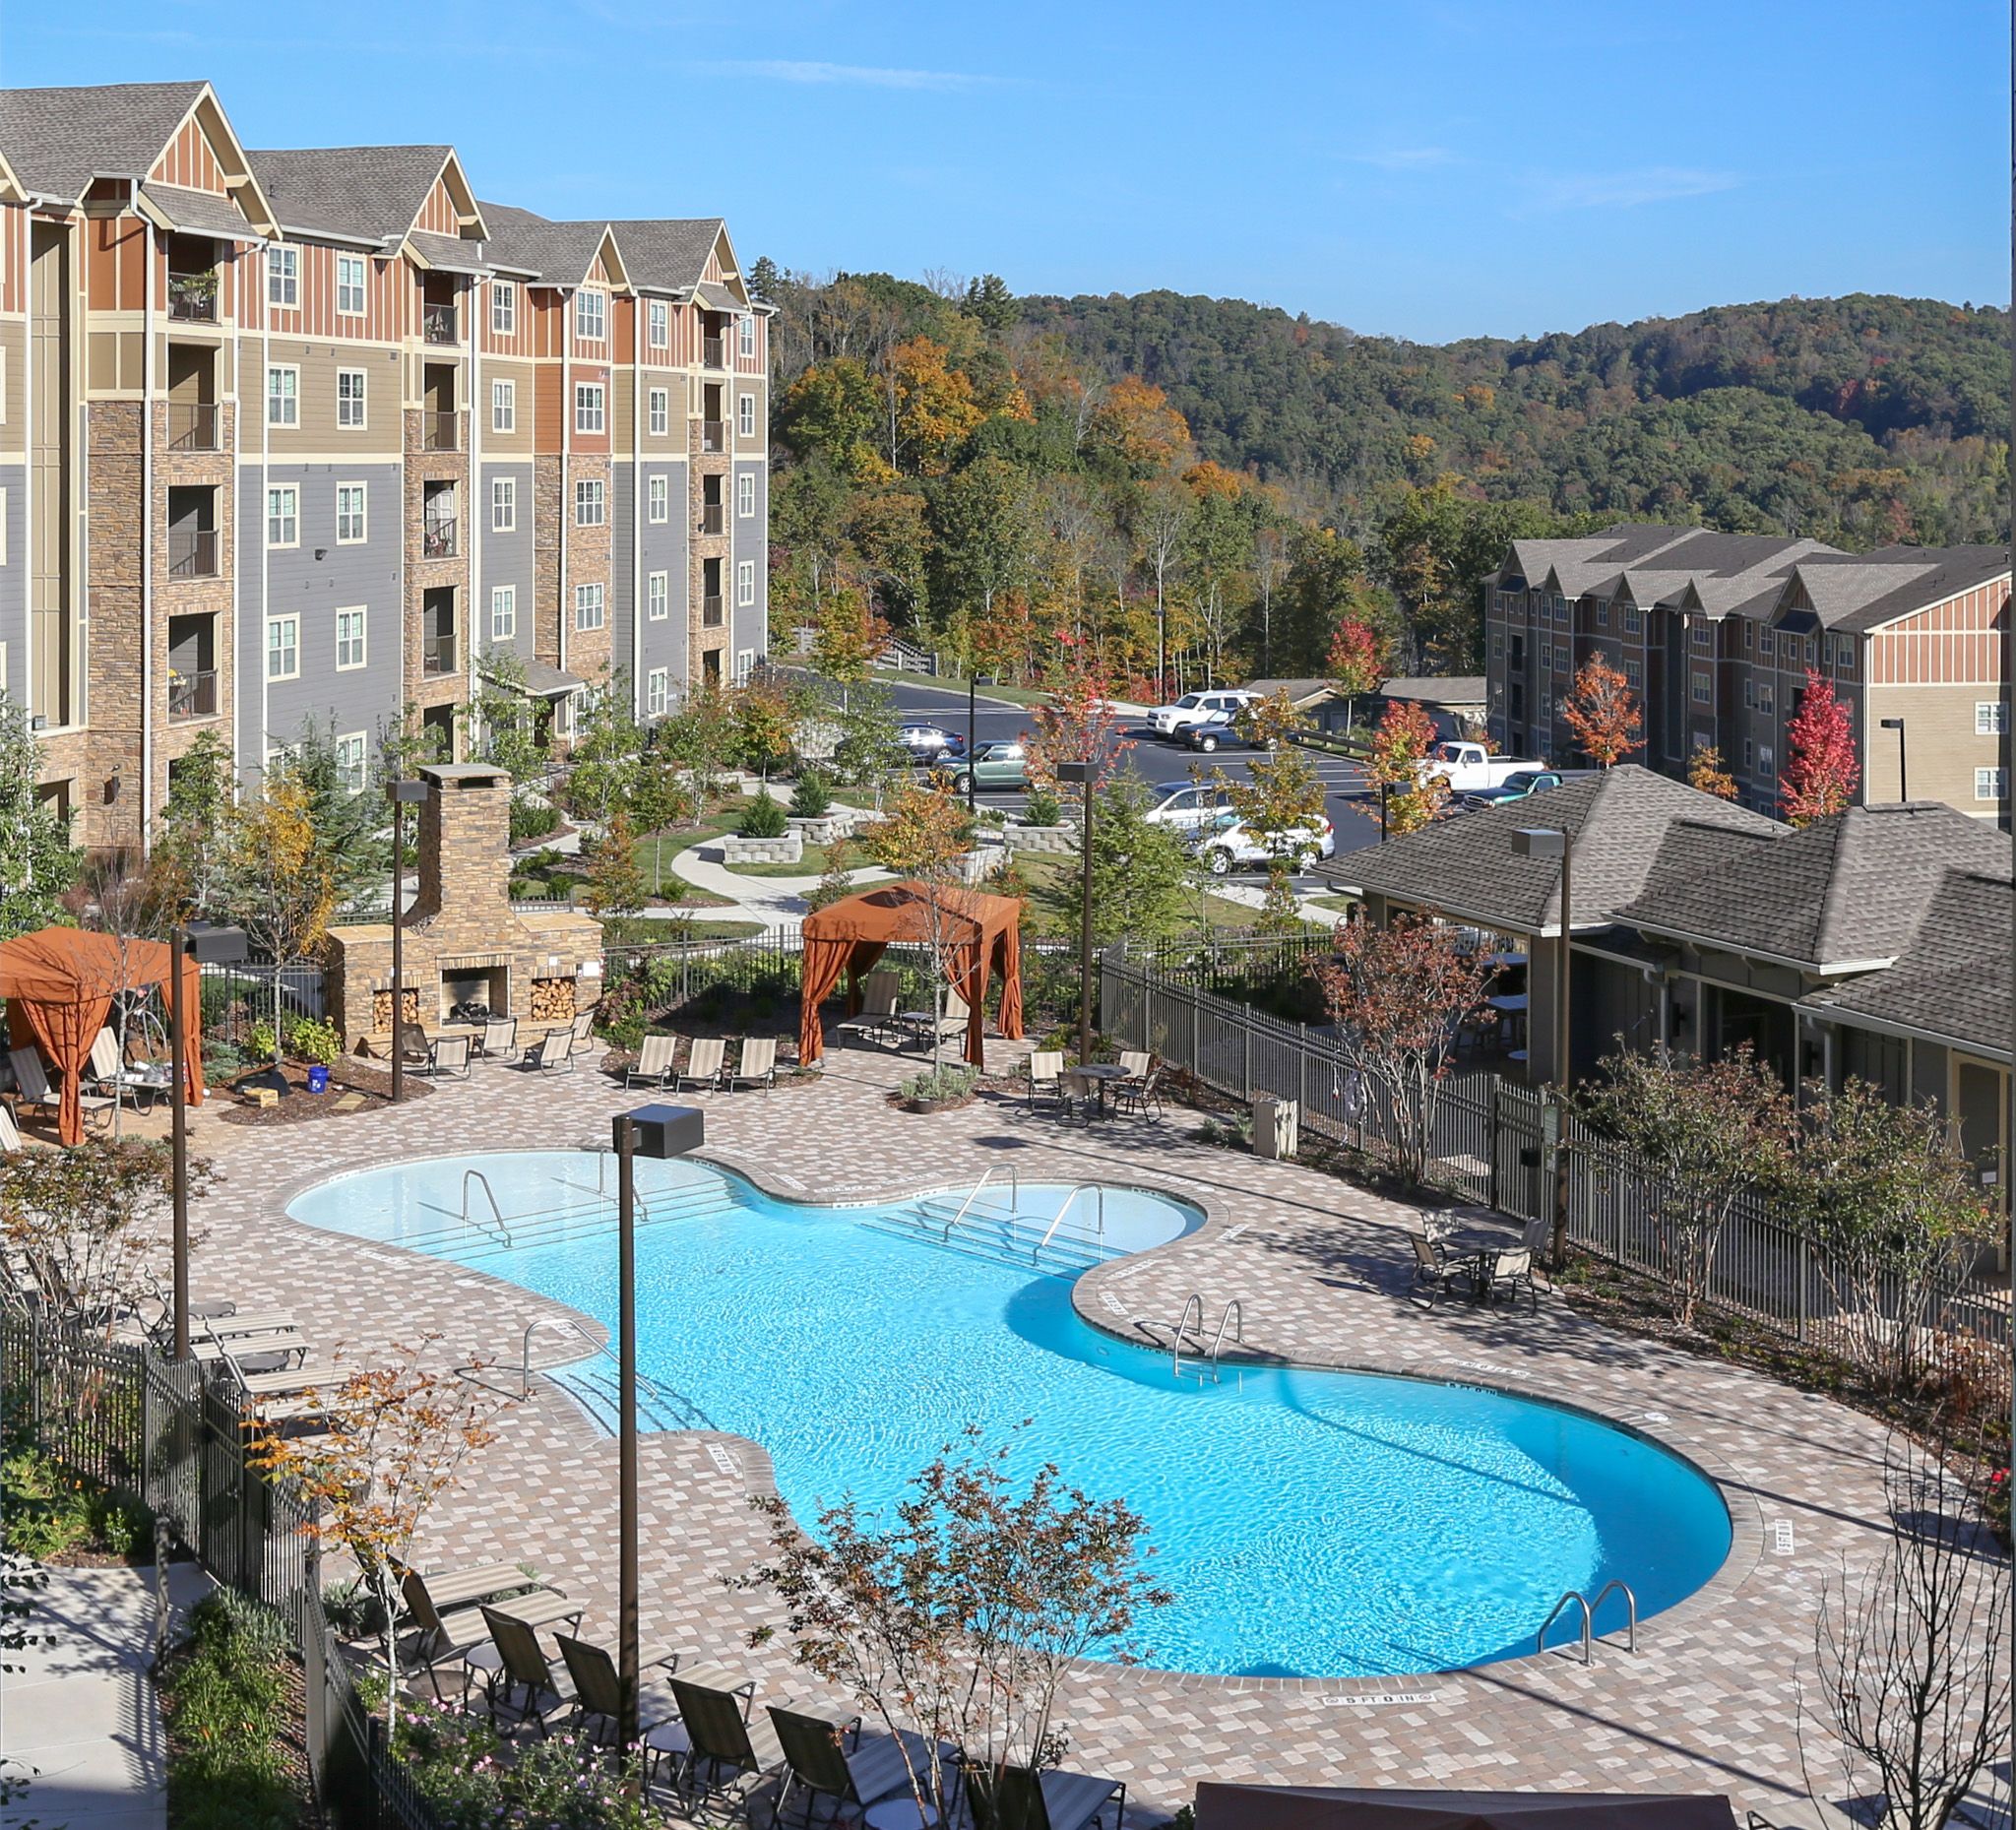 Commercial photography of The Aventine apartments in Asheville, NC. View shooting down on the pool looking out over the blue ridge mountains.